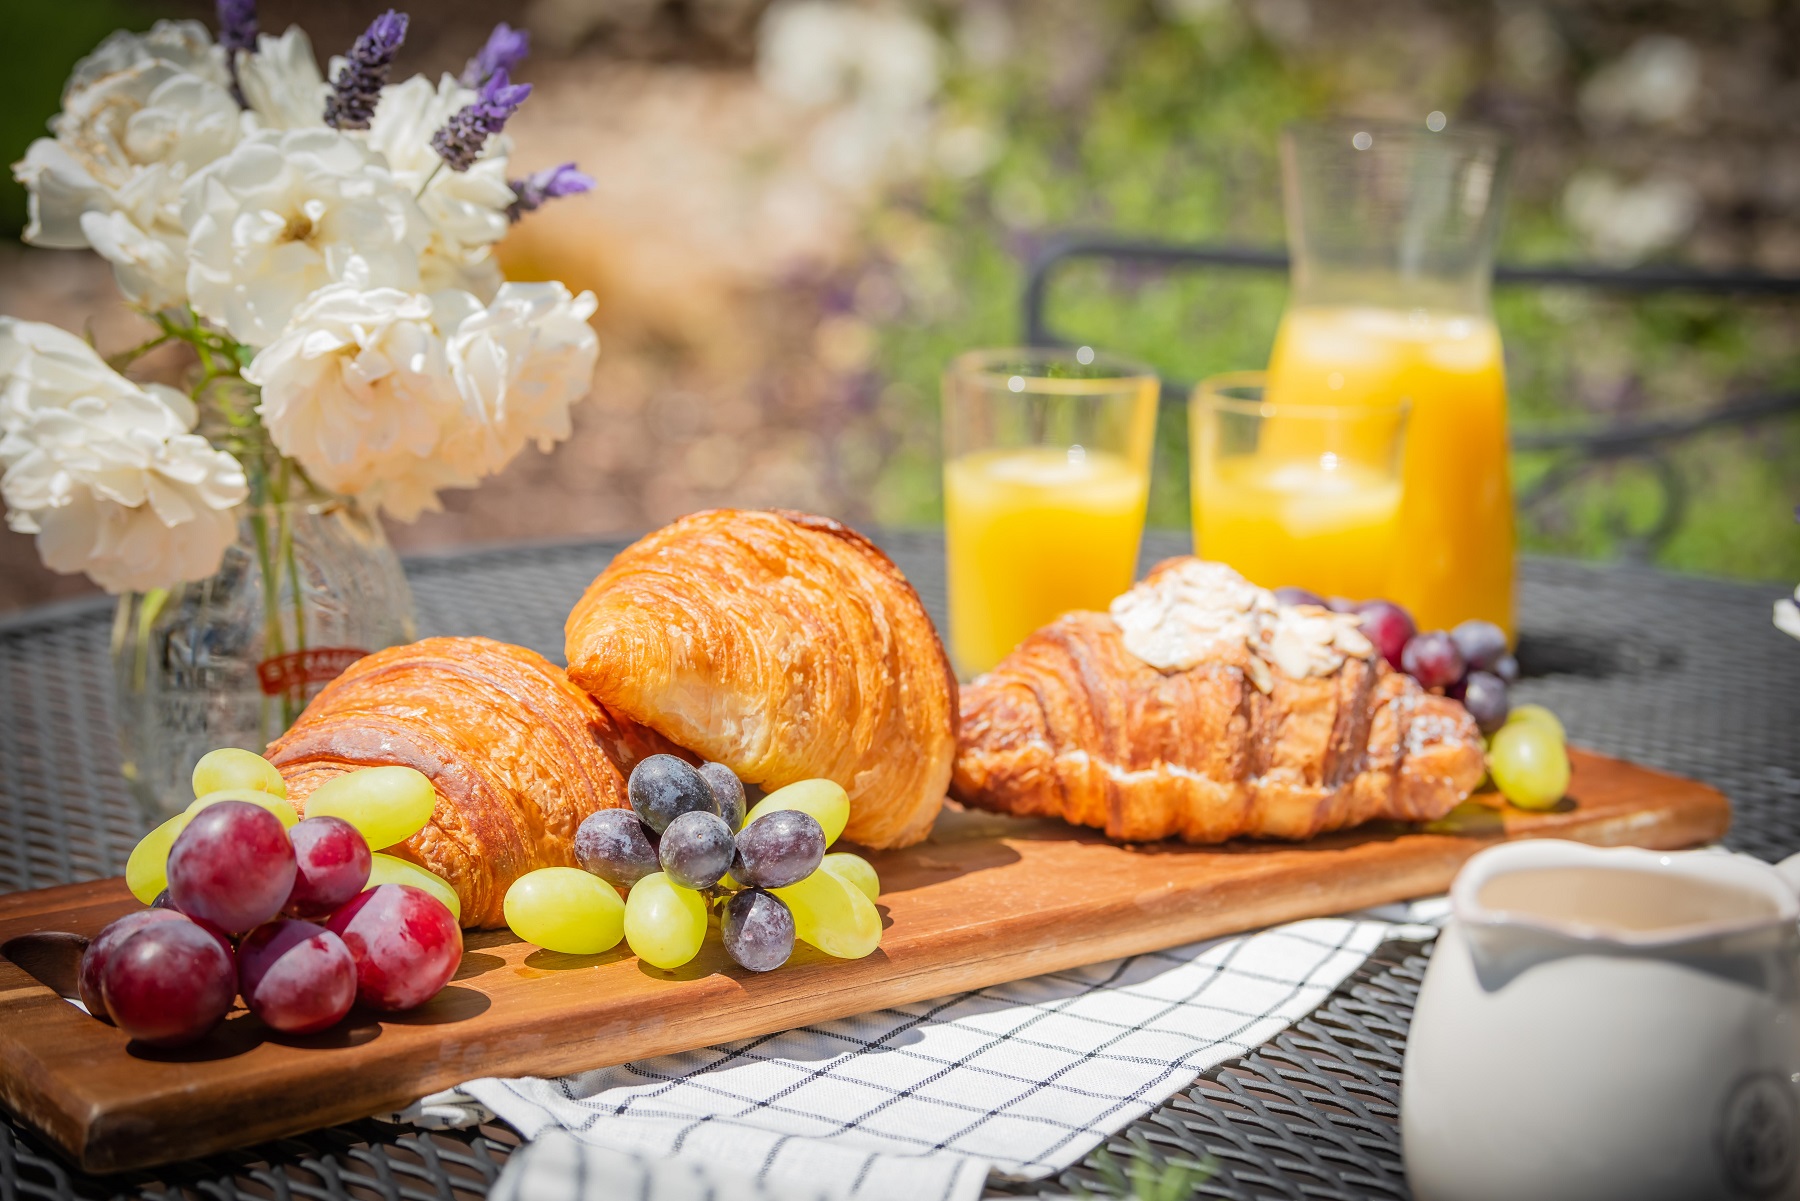 A continental breakfast on the front patio.